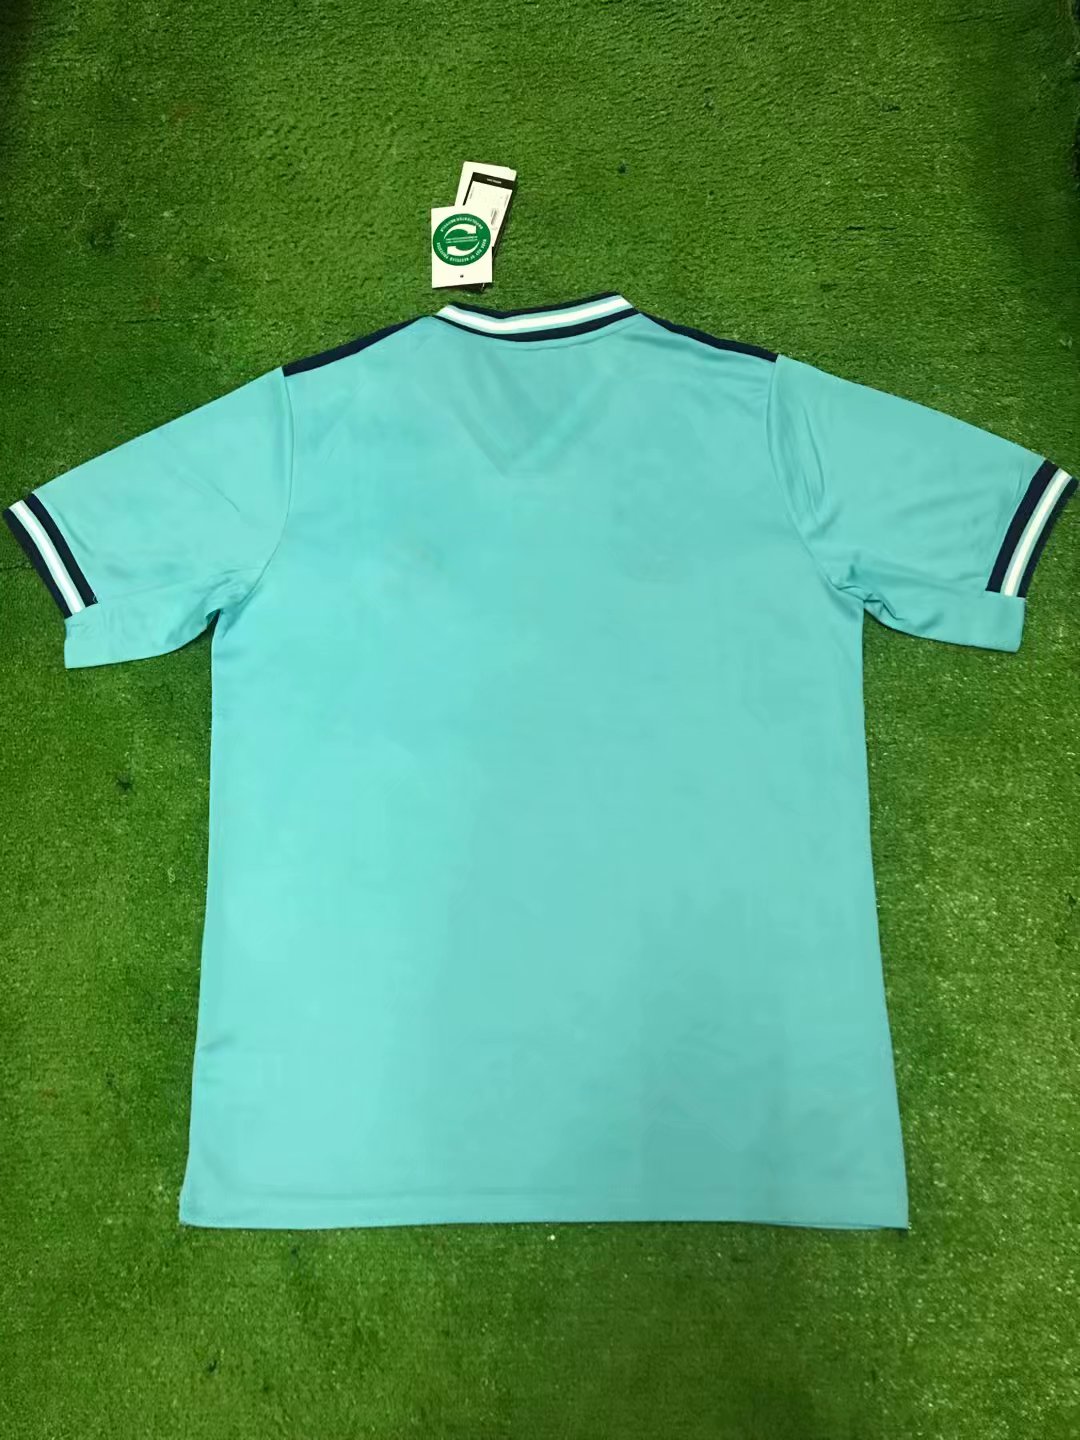 Real Madrid Home 2019-20 Green Soccer Jersey Shirt - Click Image to Close